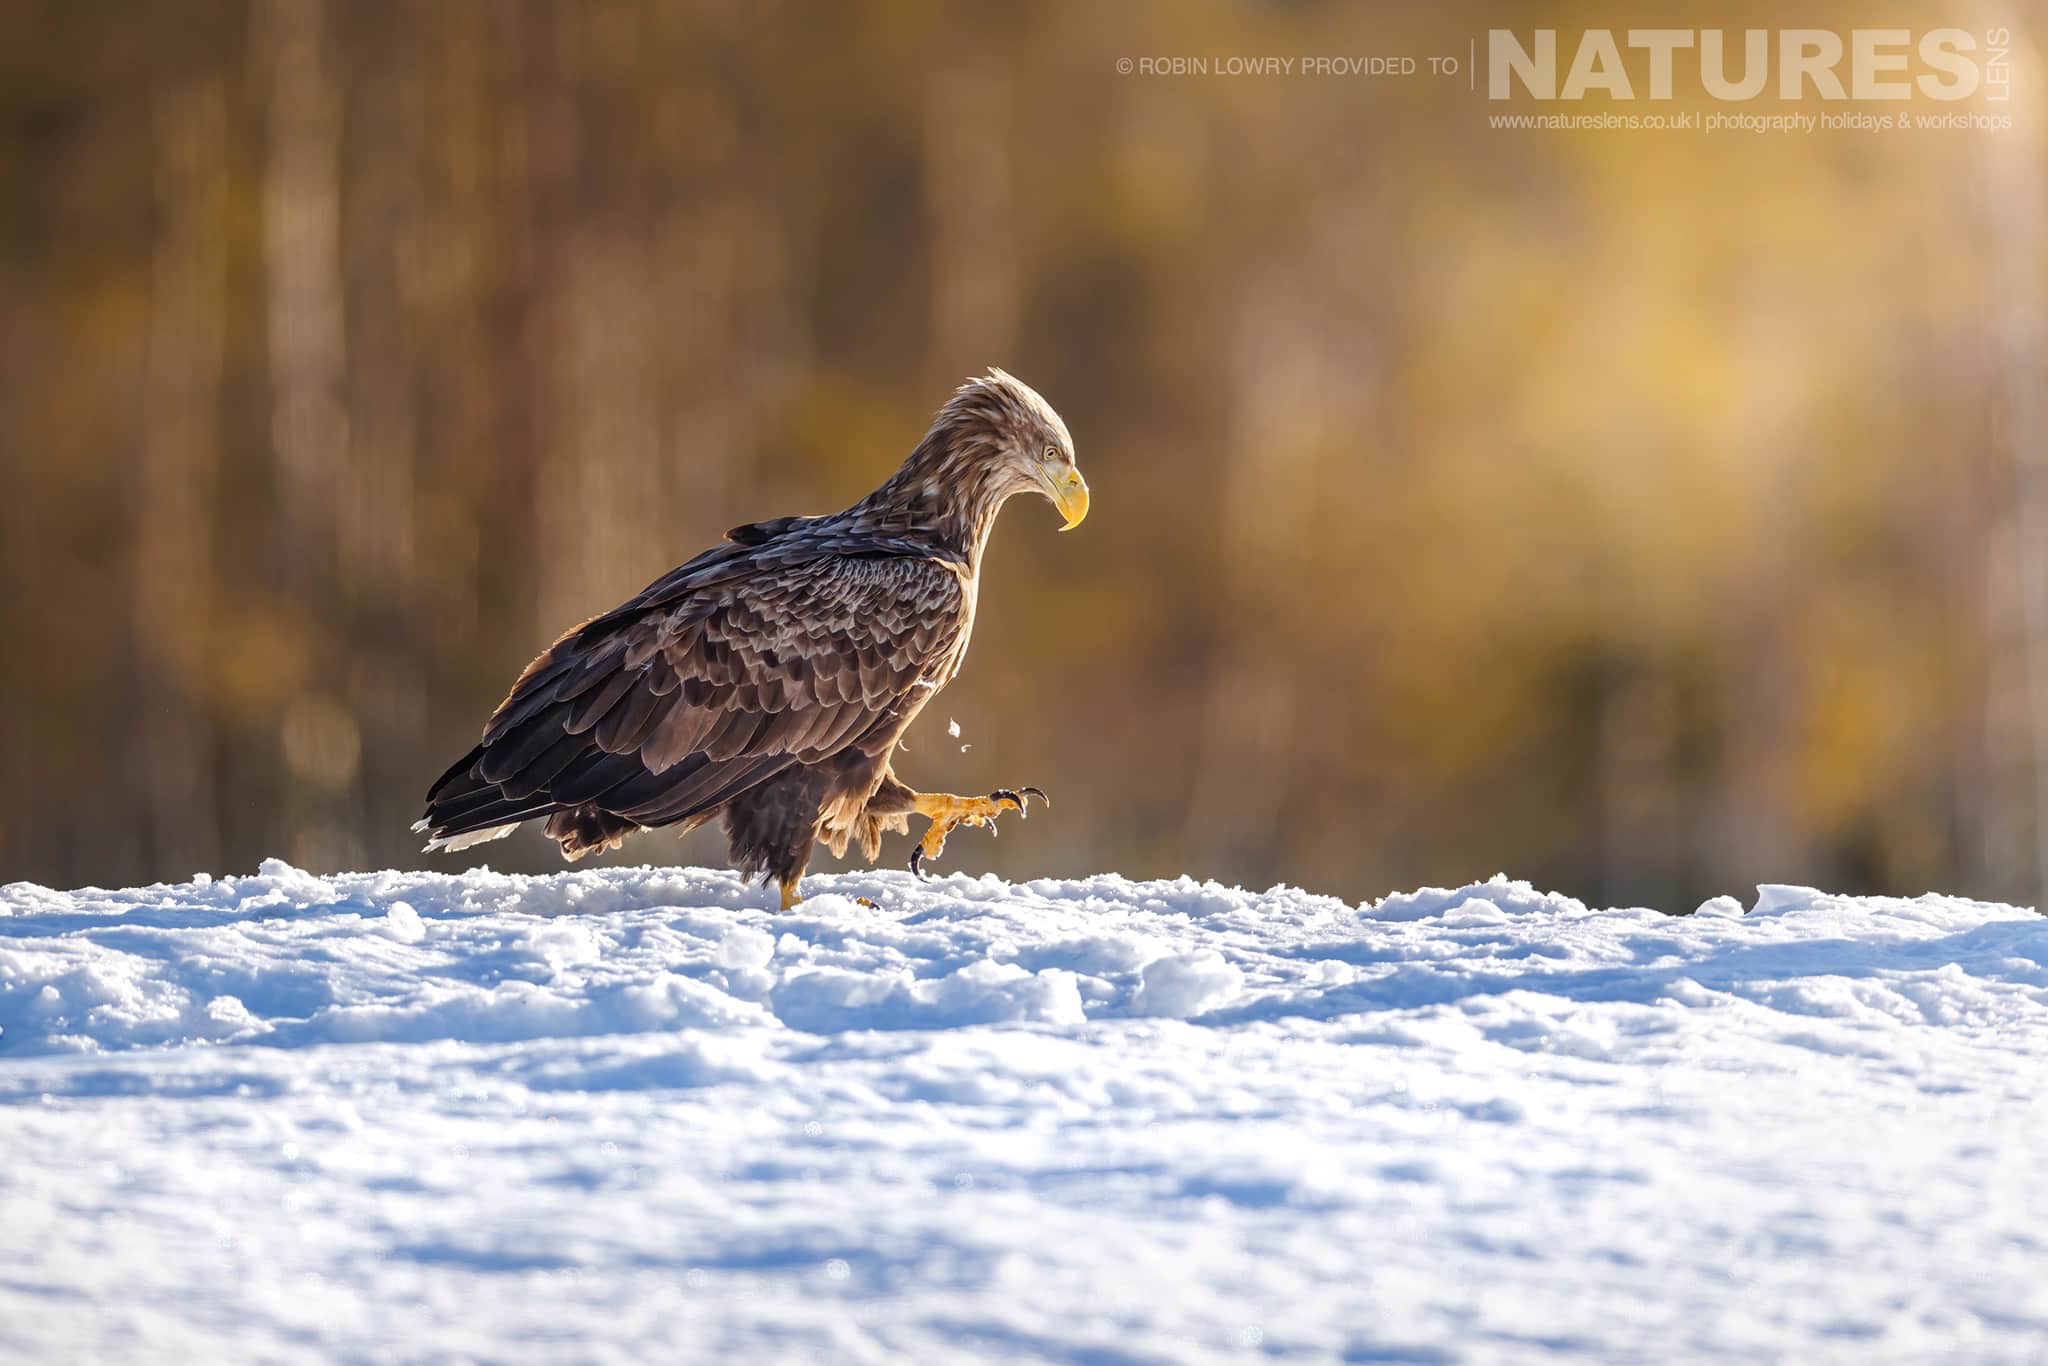 A White Tailed Eagle Walking On The Snow Photographed During A Natureslens Photography Holiday To Photograph Northern Sweden'S Eagles In Winter